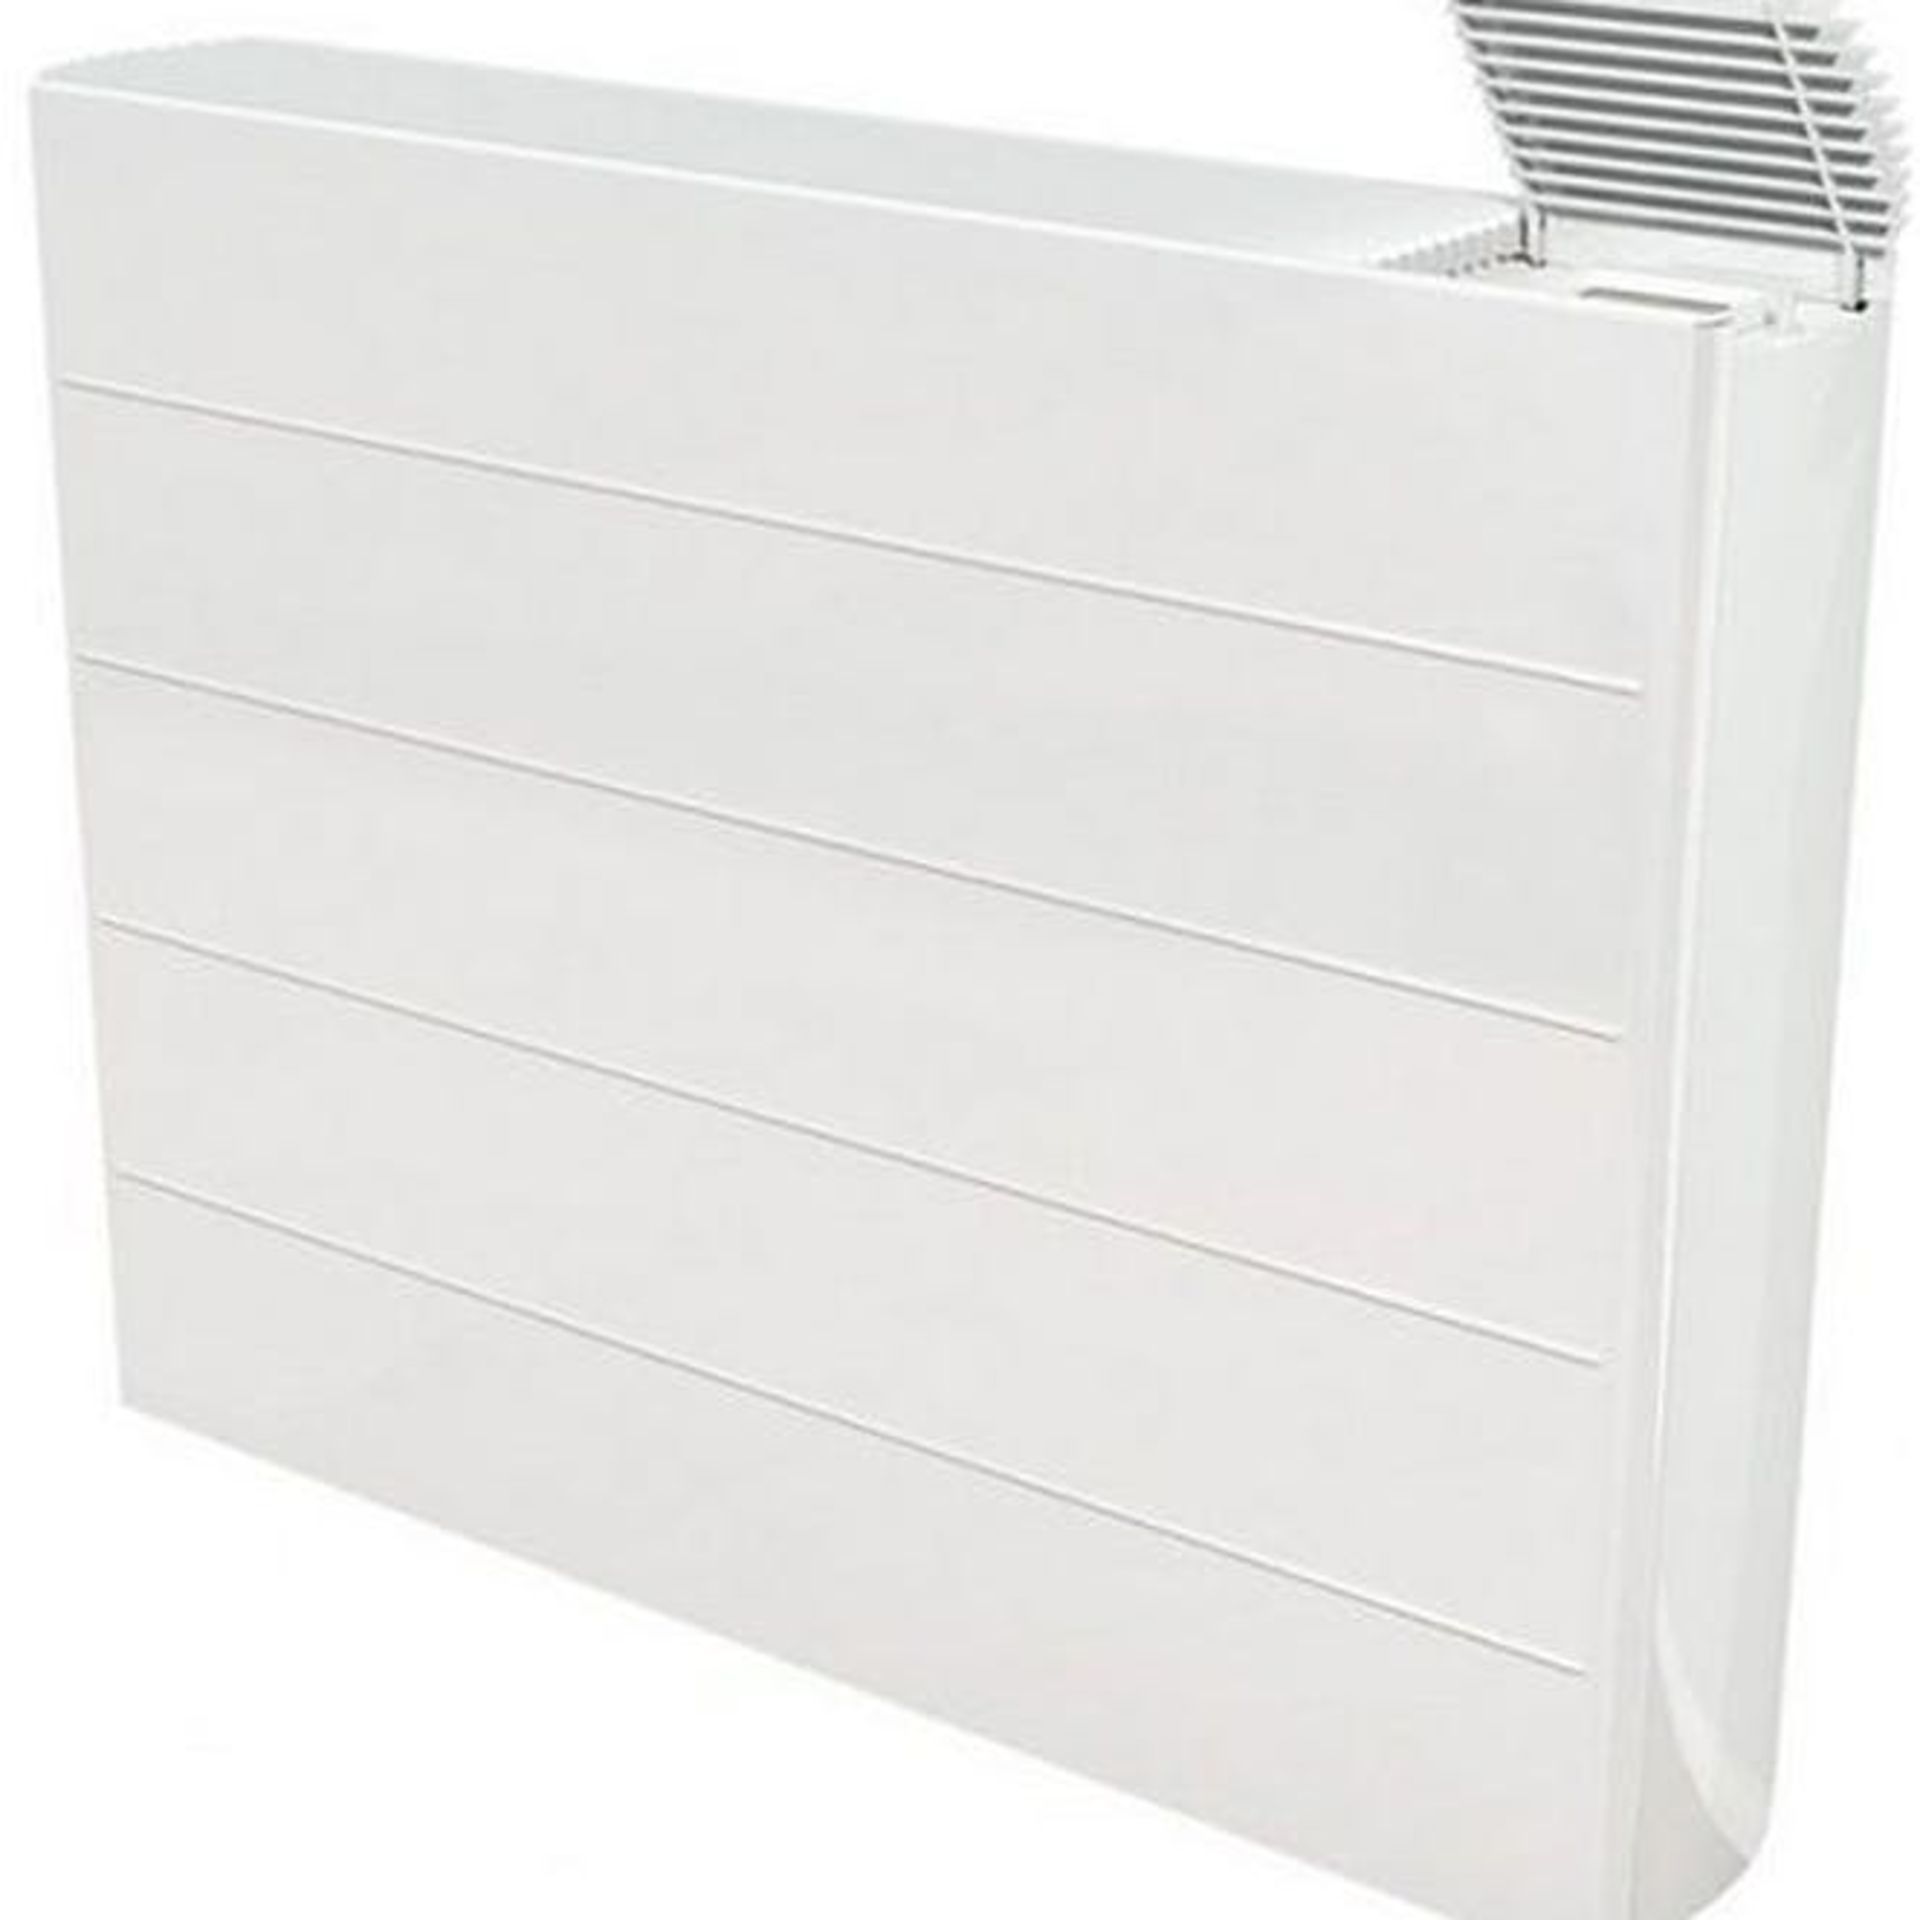 (QP6) Myson iVector IV1402PBC MKII - 600 x 1200mm - 2 Pipe Fan Convector Heater - White. RRP £...